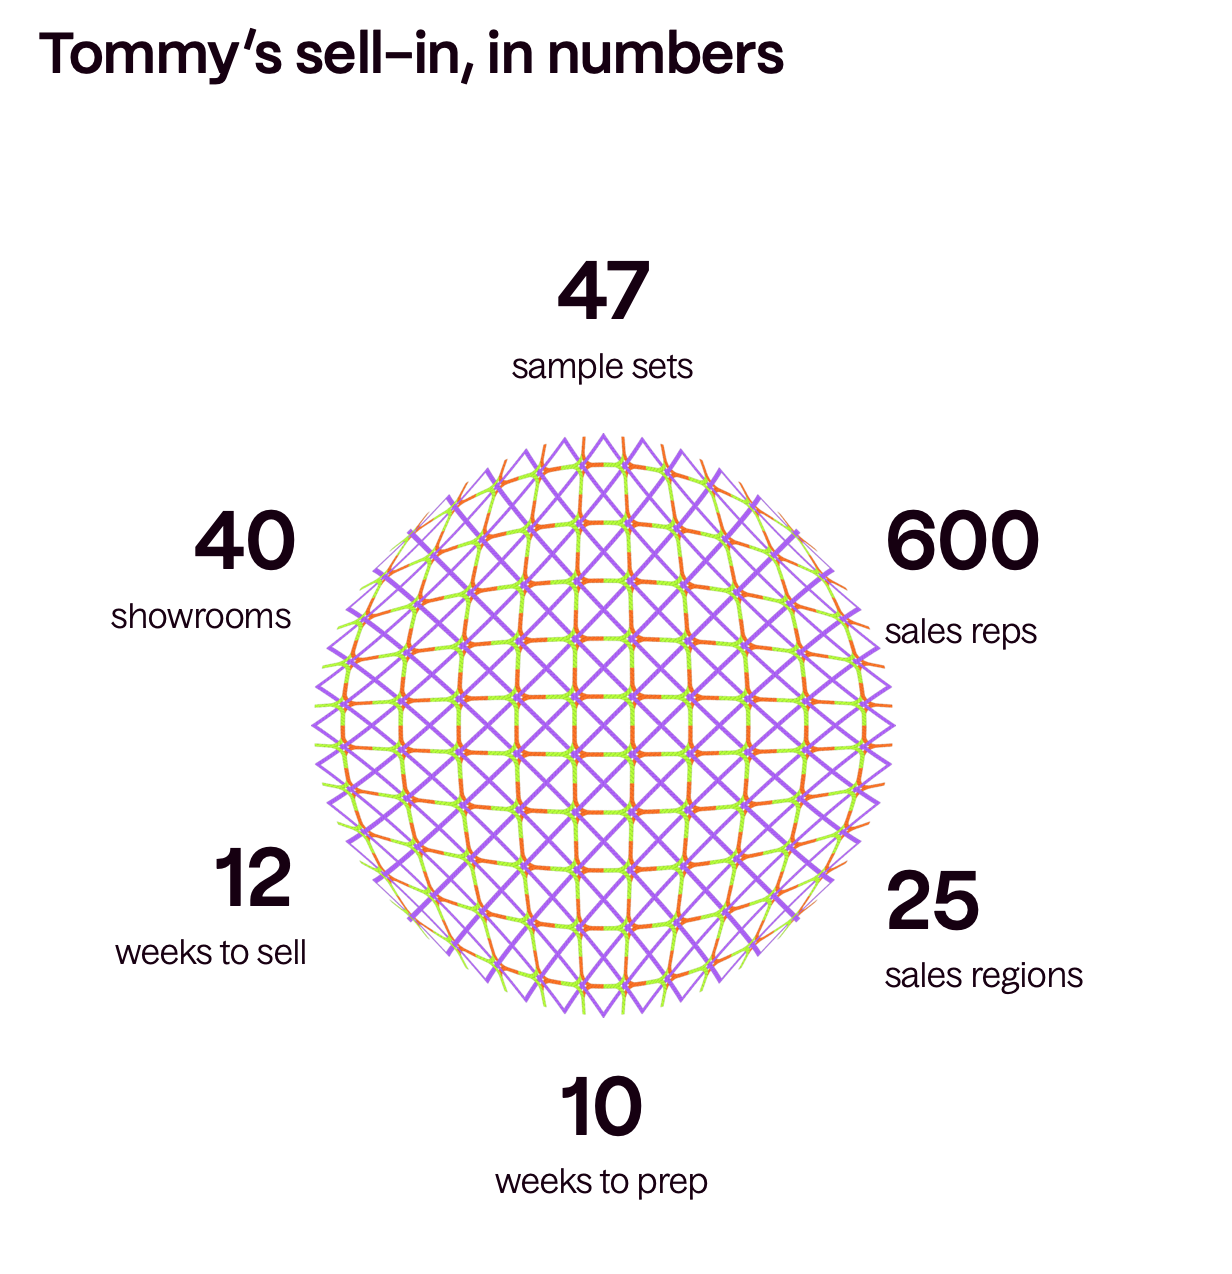 Tommy sell-in numbers